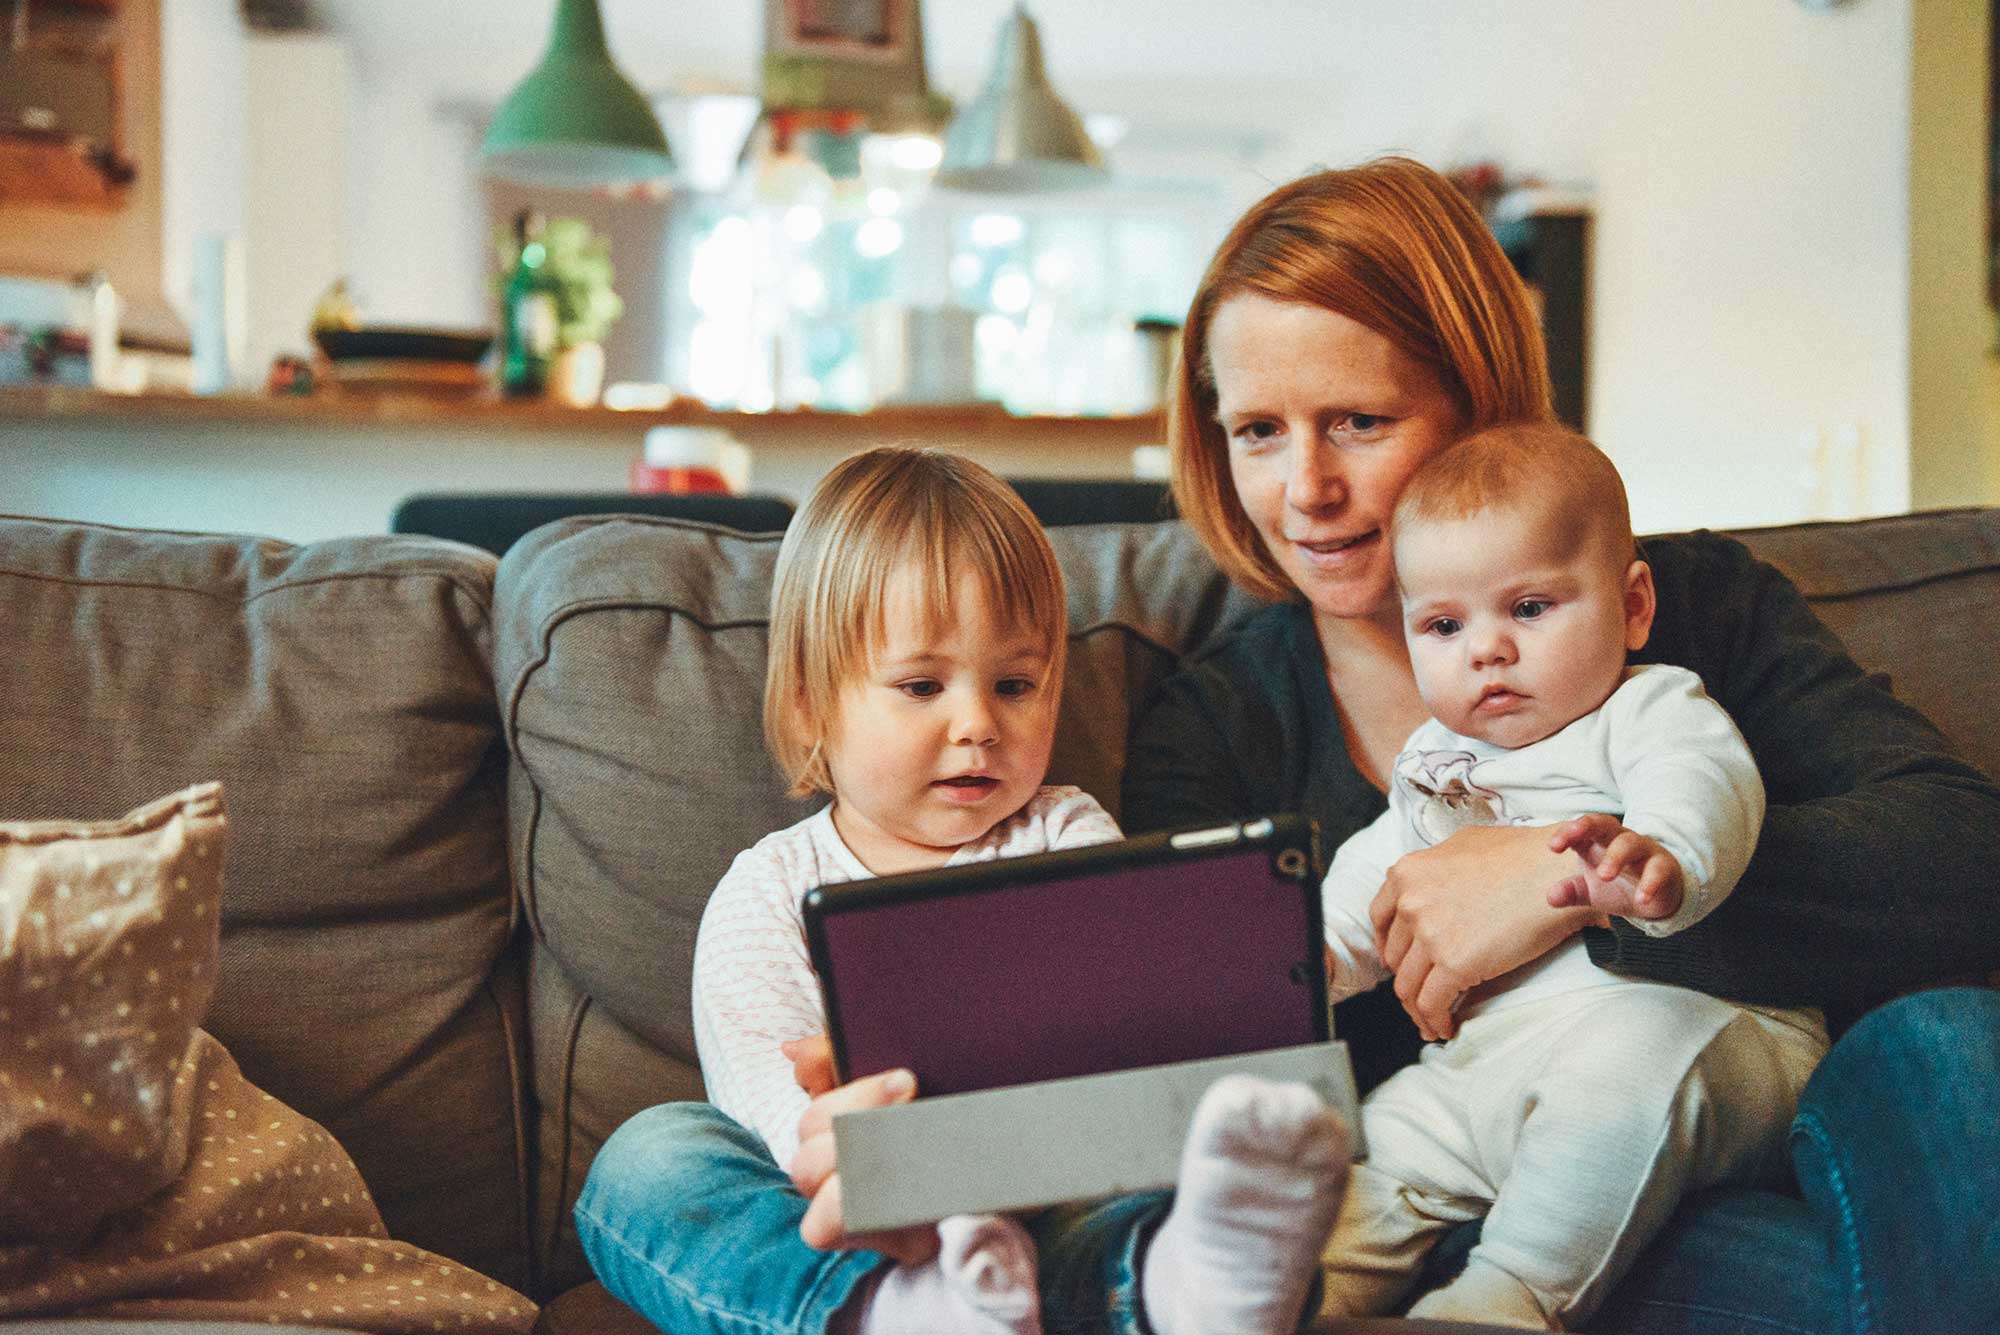 A woman looks at a tablet with a baby and toddler